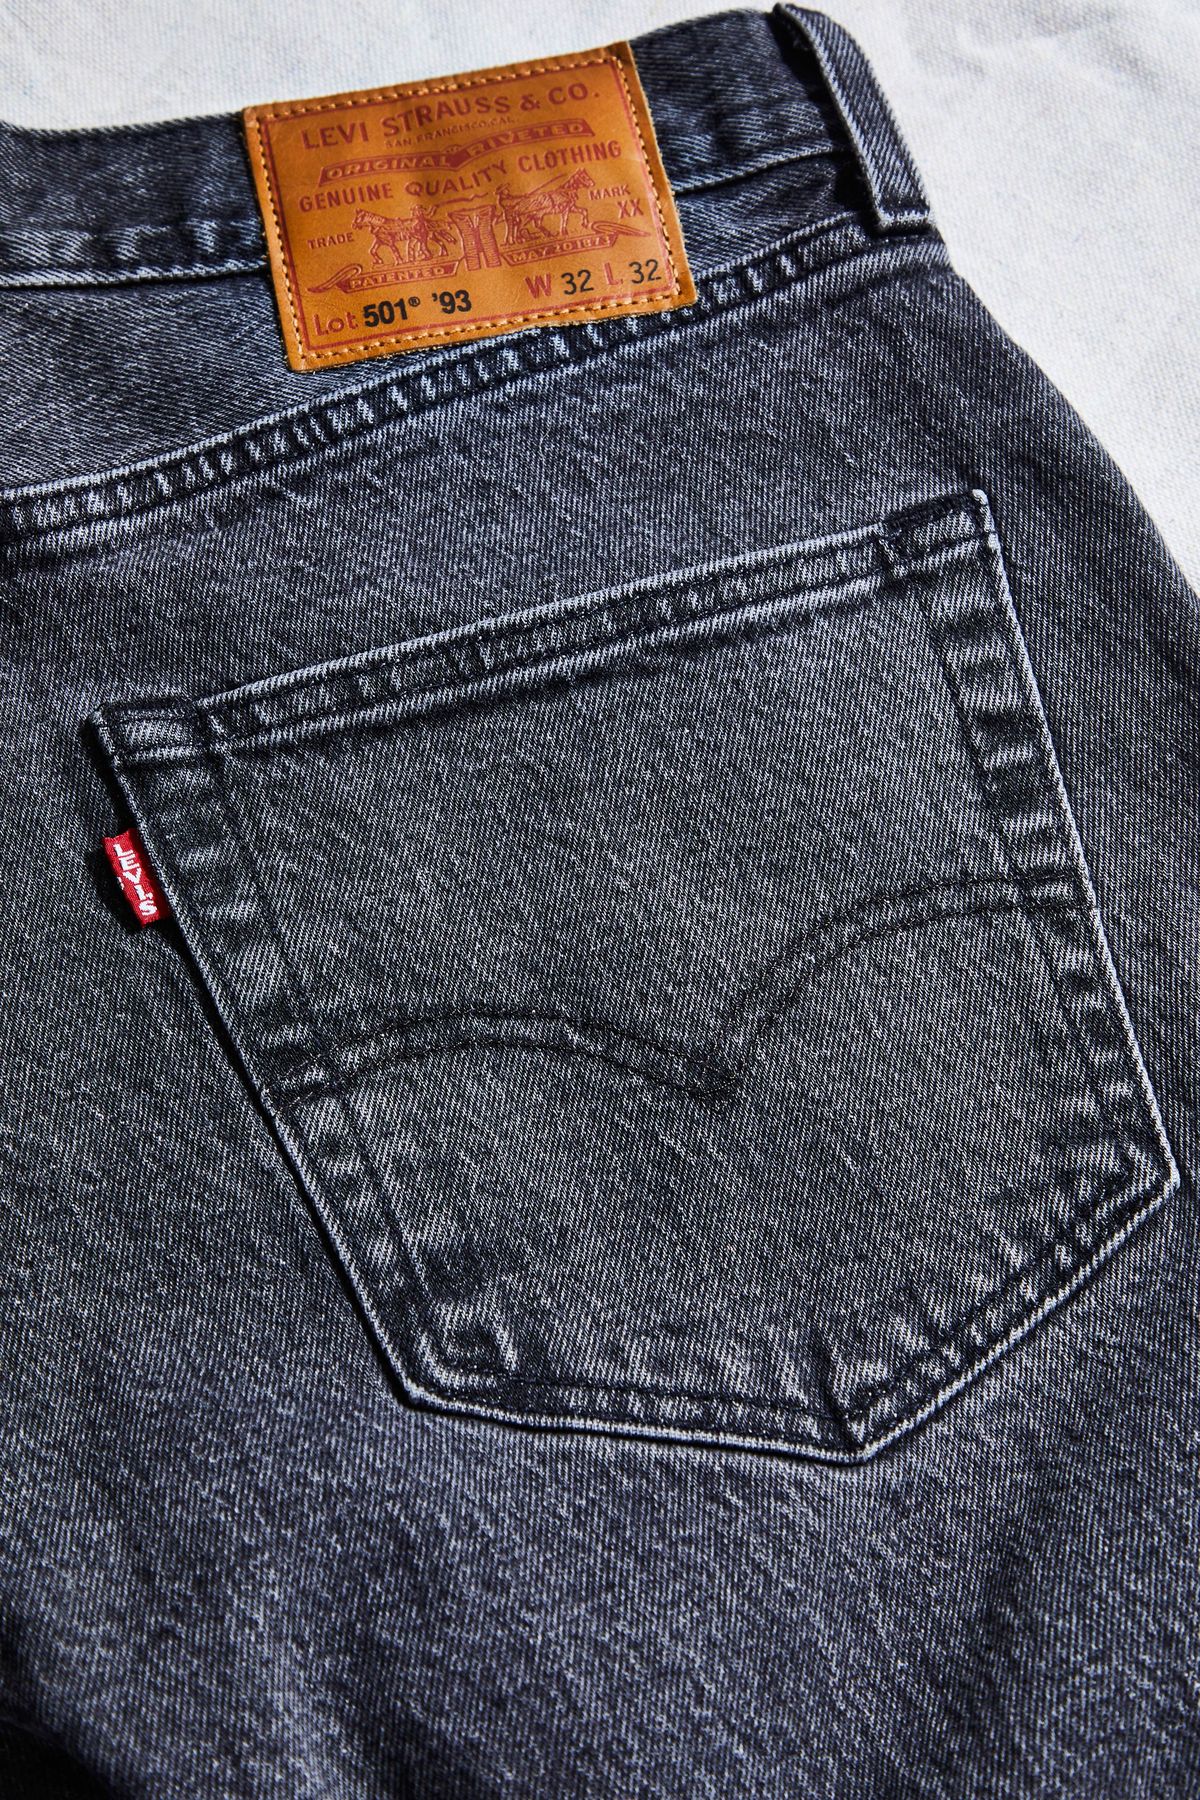 laag Terugbetaling kleermaker Levi's 501 '93 Jeans Review and Endorsement